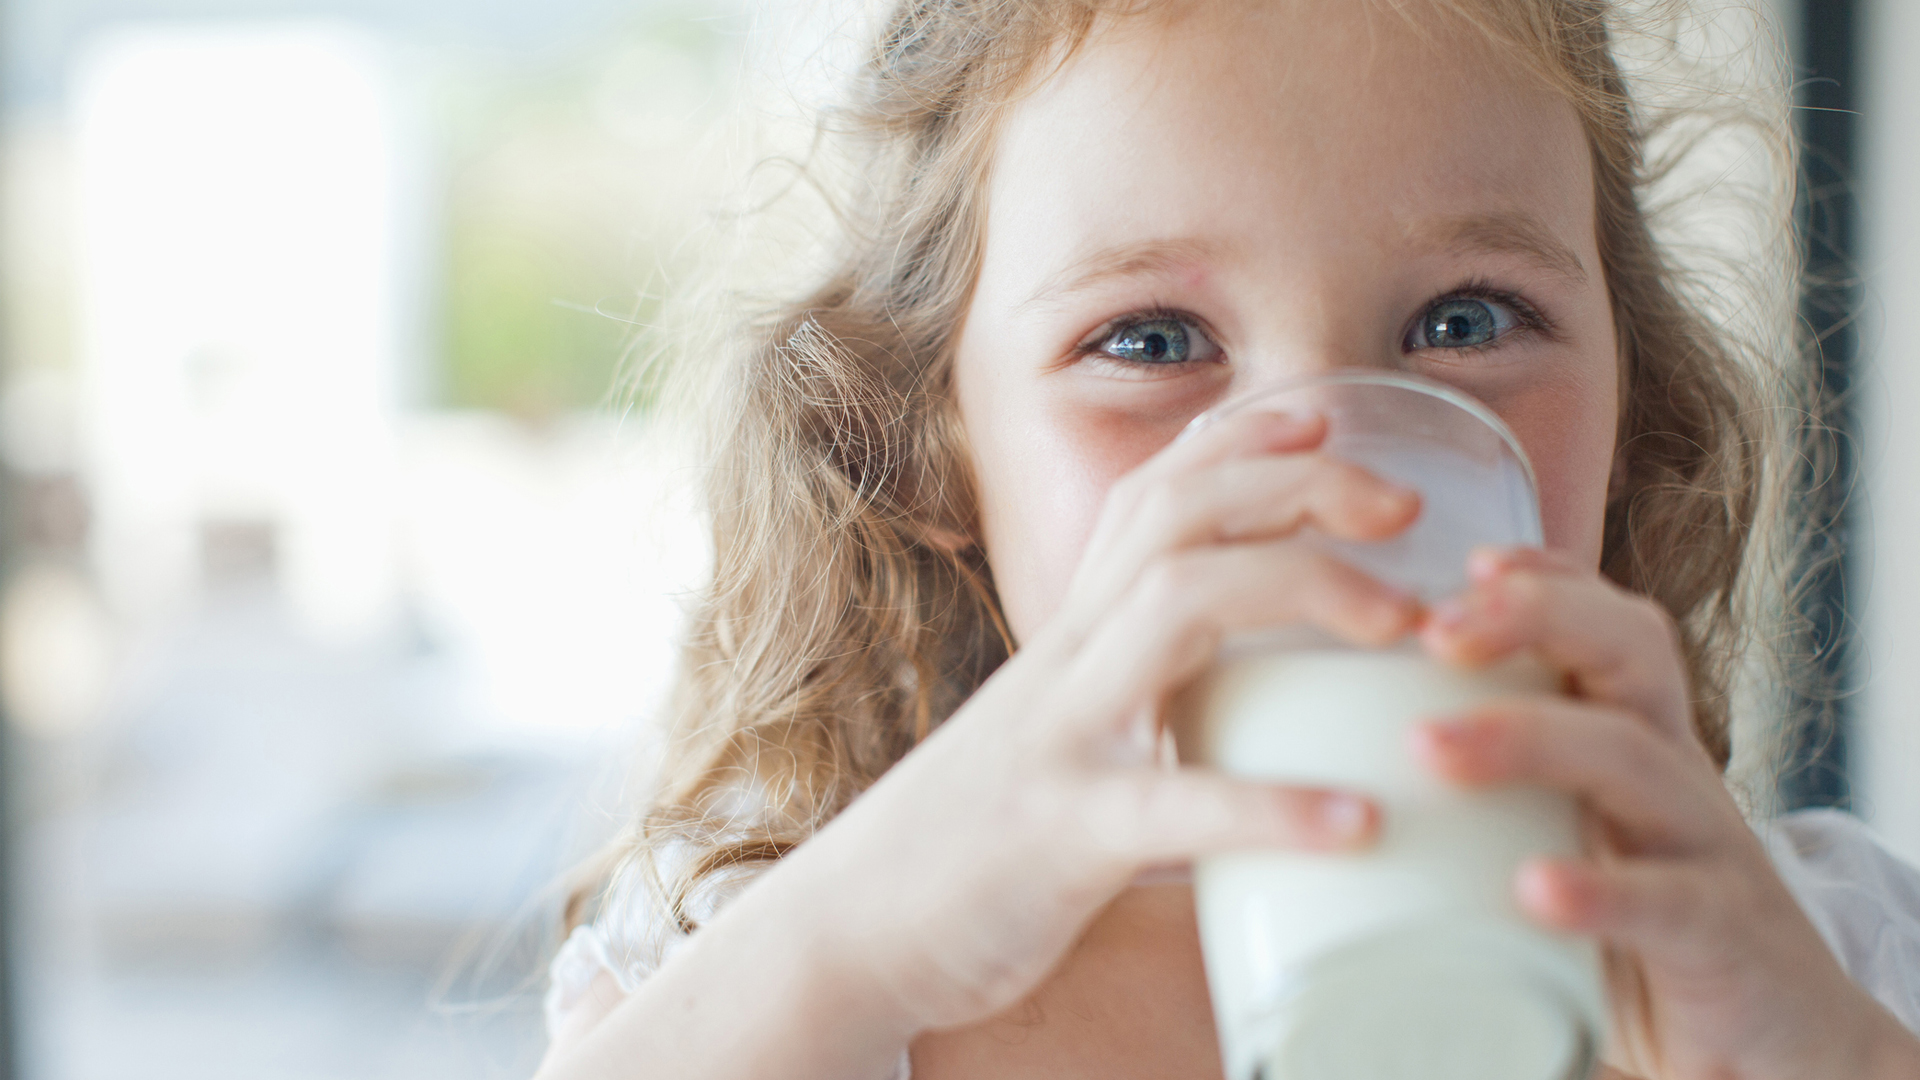 The image shows a girl drinking a glass of milk